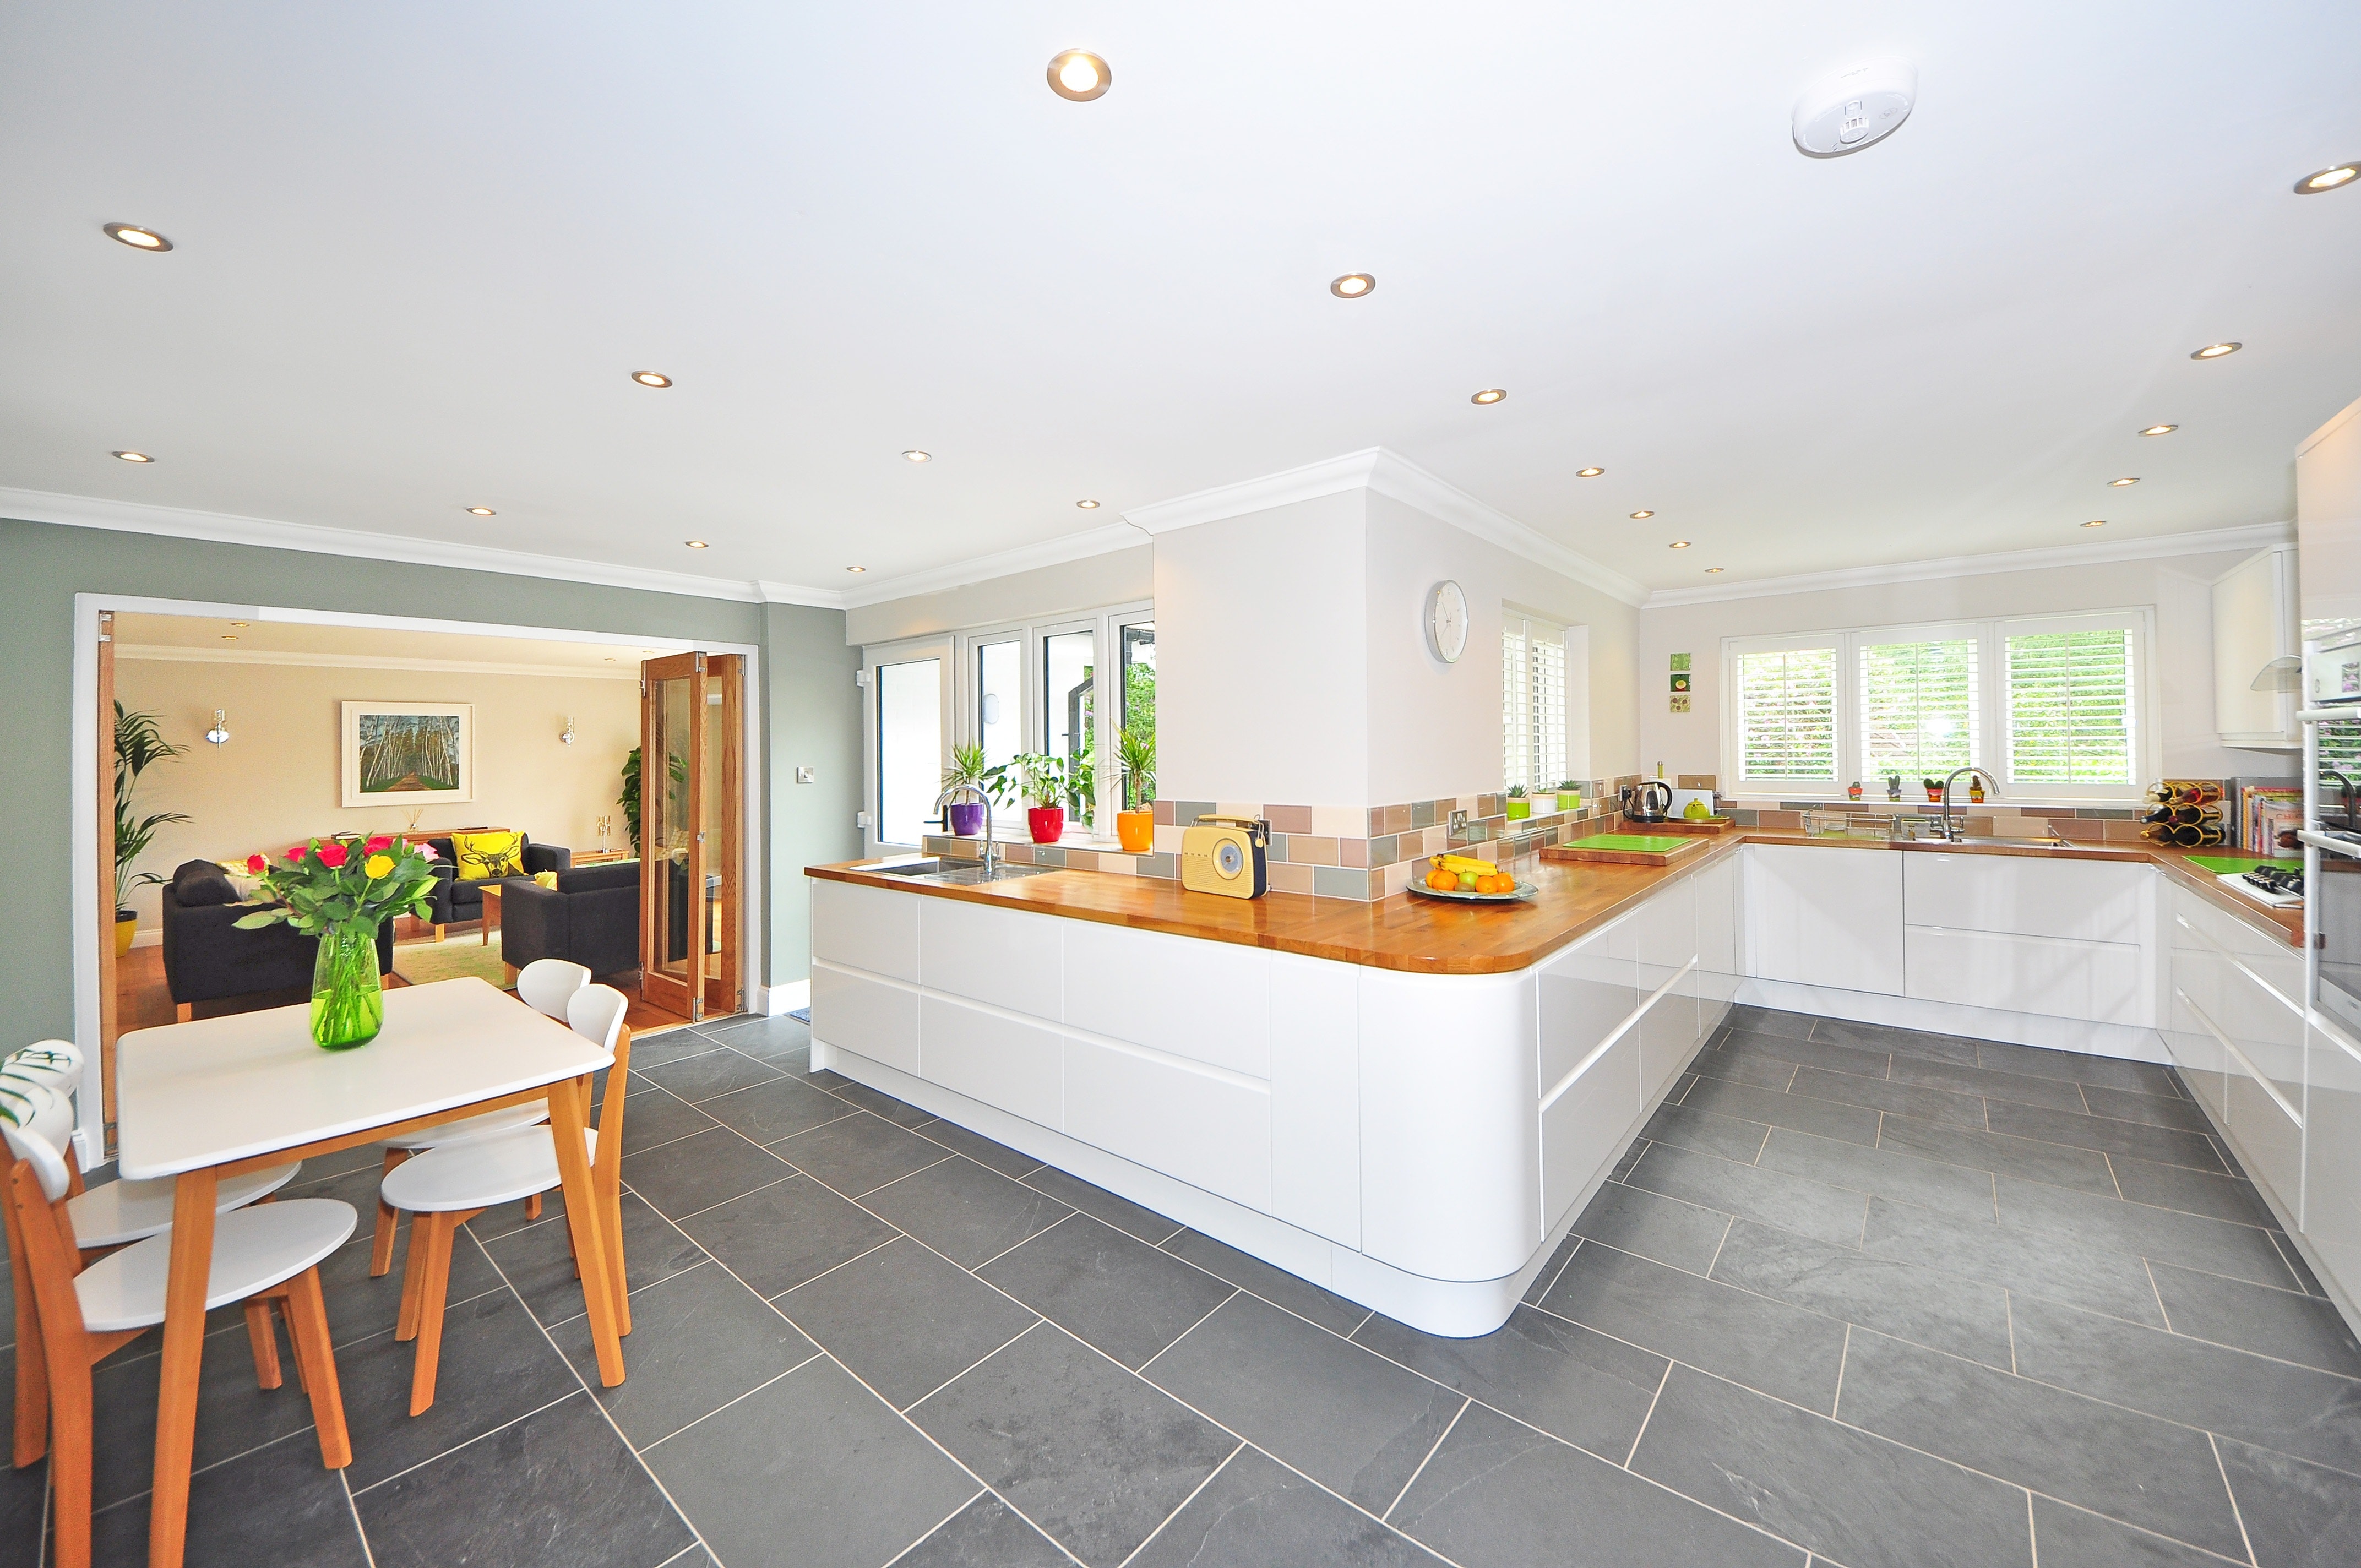 Floor tiles and wall tiles in a modern kitchen. 